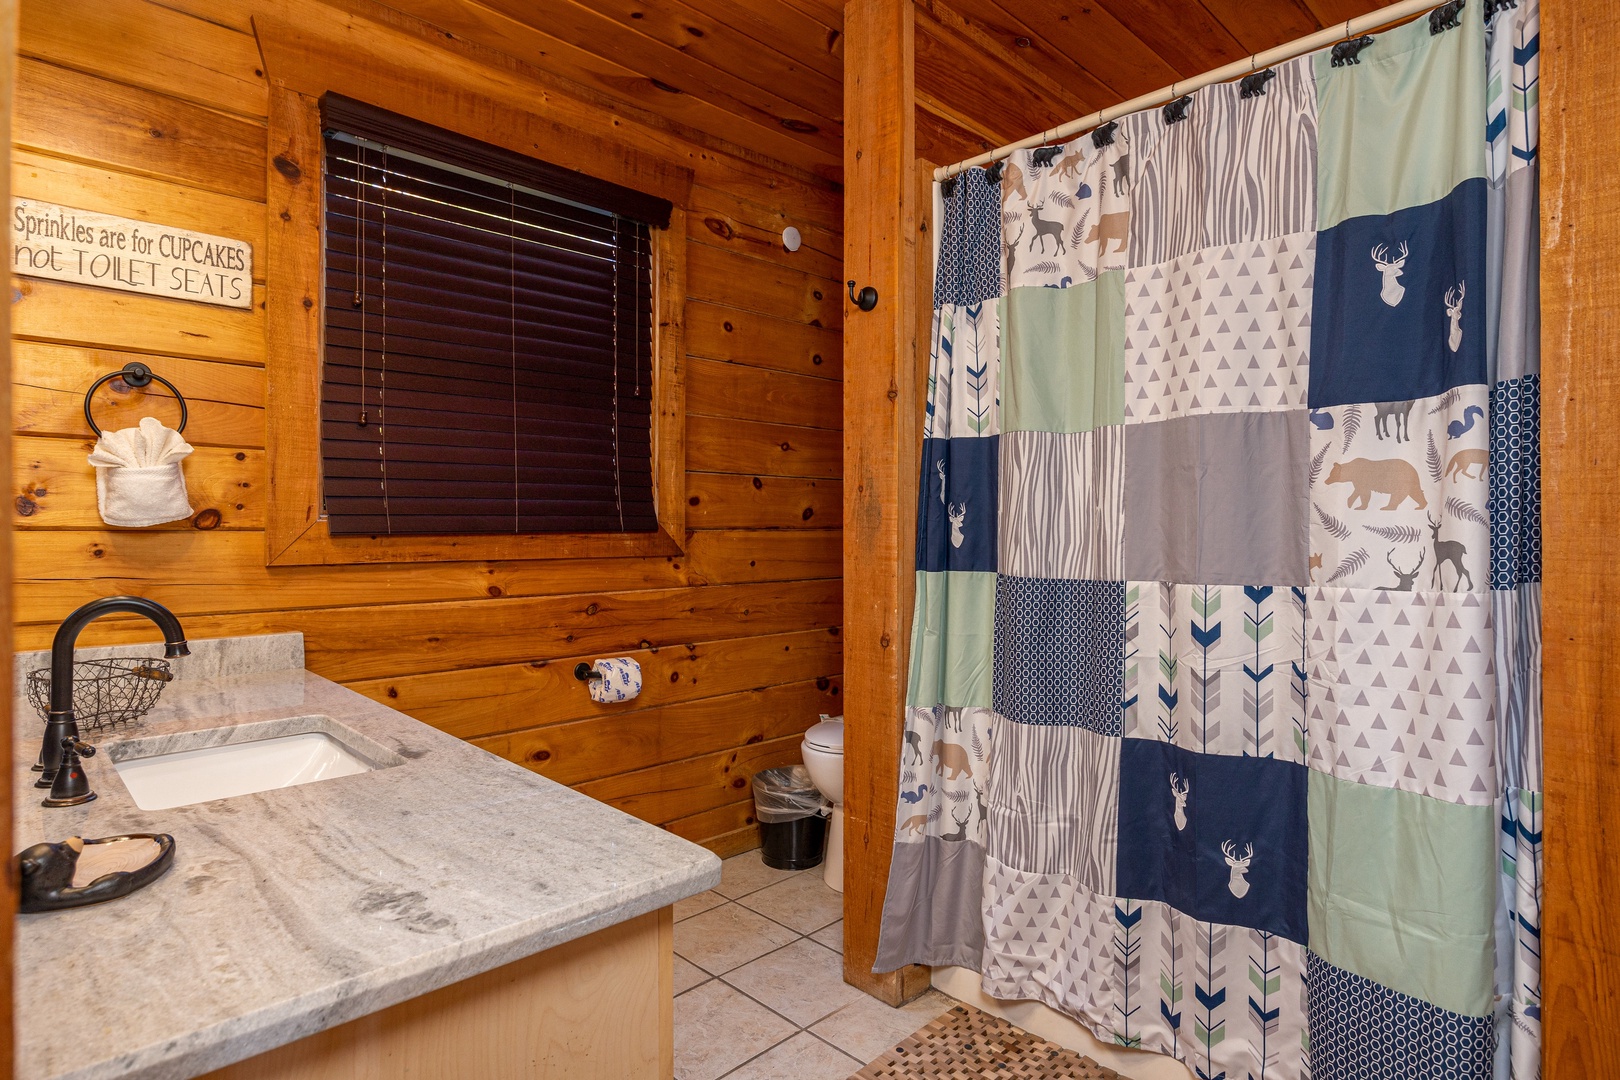 Bathroom with bath/shower combo at Bear Feet Retreat, a 1 bedroom cabin rental located in pigeon forge